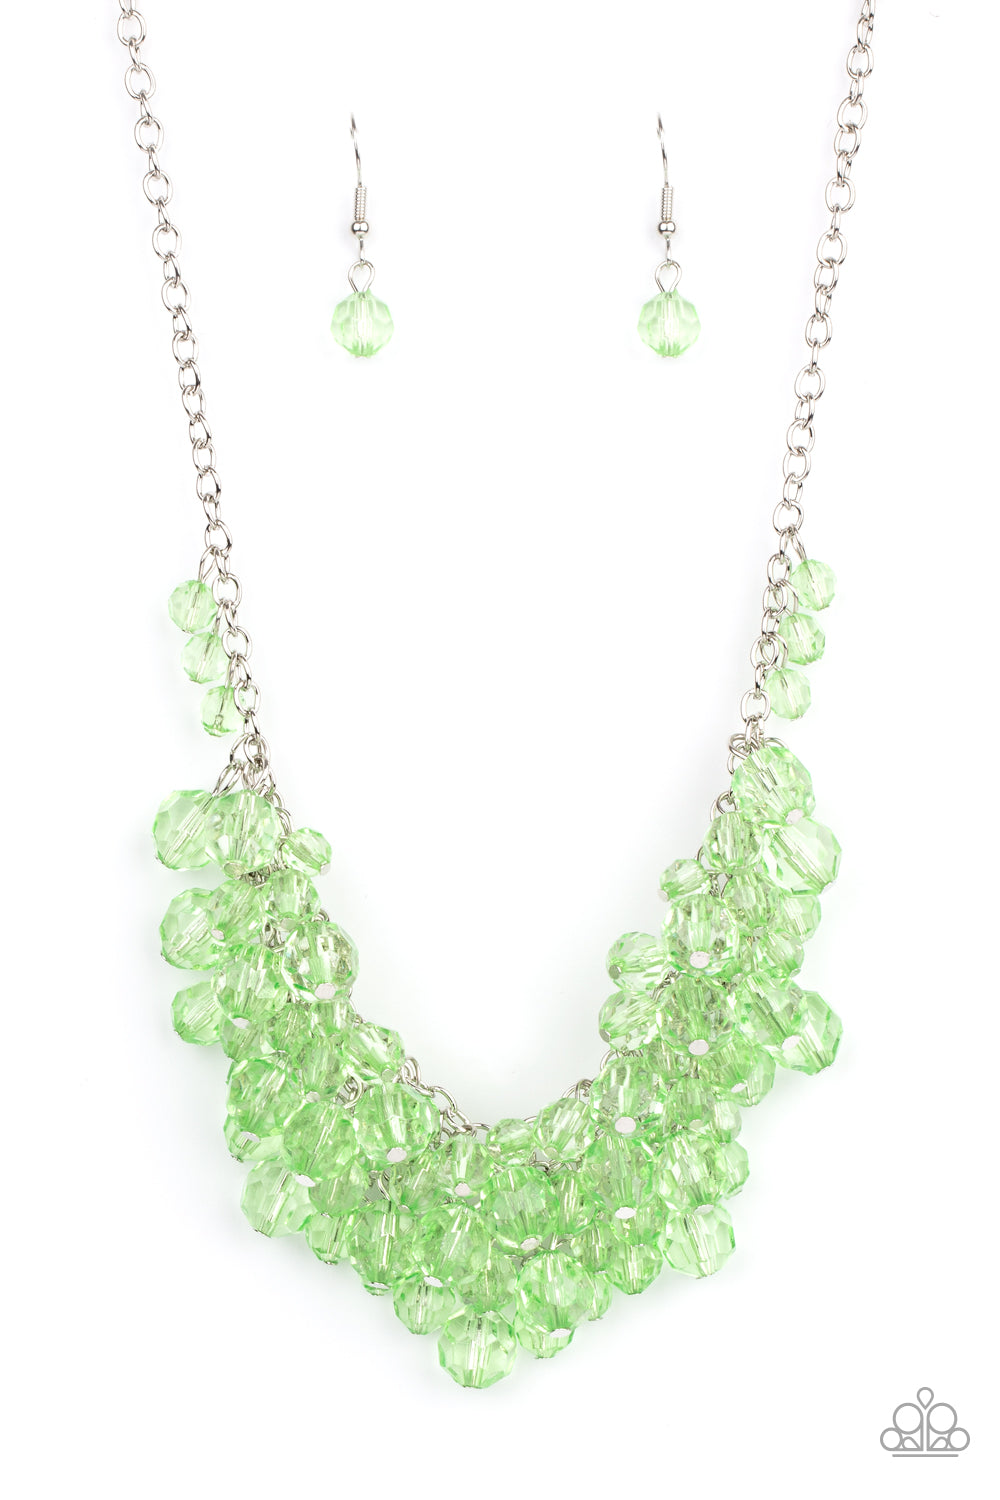 Let The Festivities Begin Necklace (Red, Green)